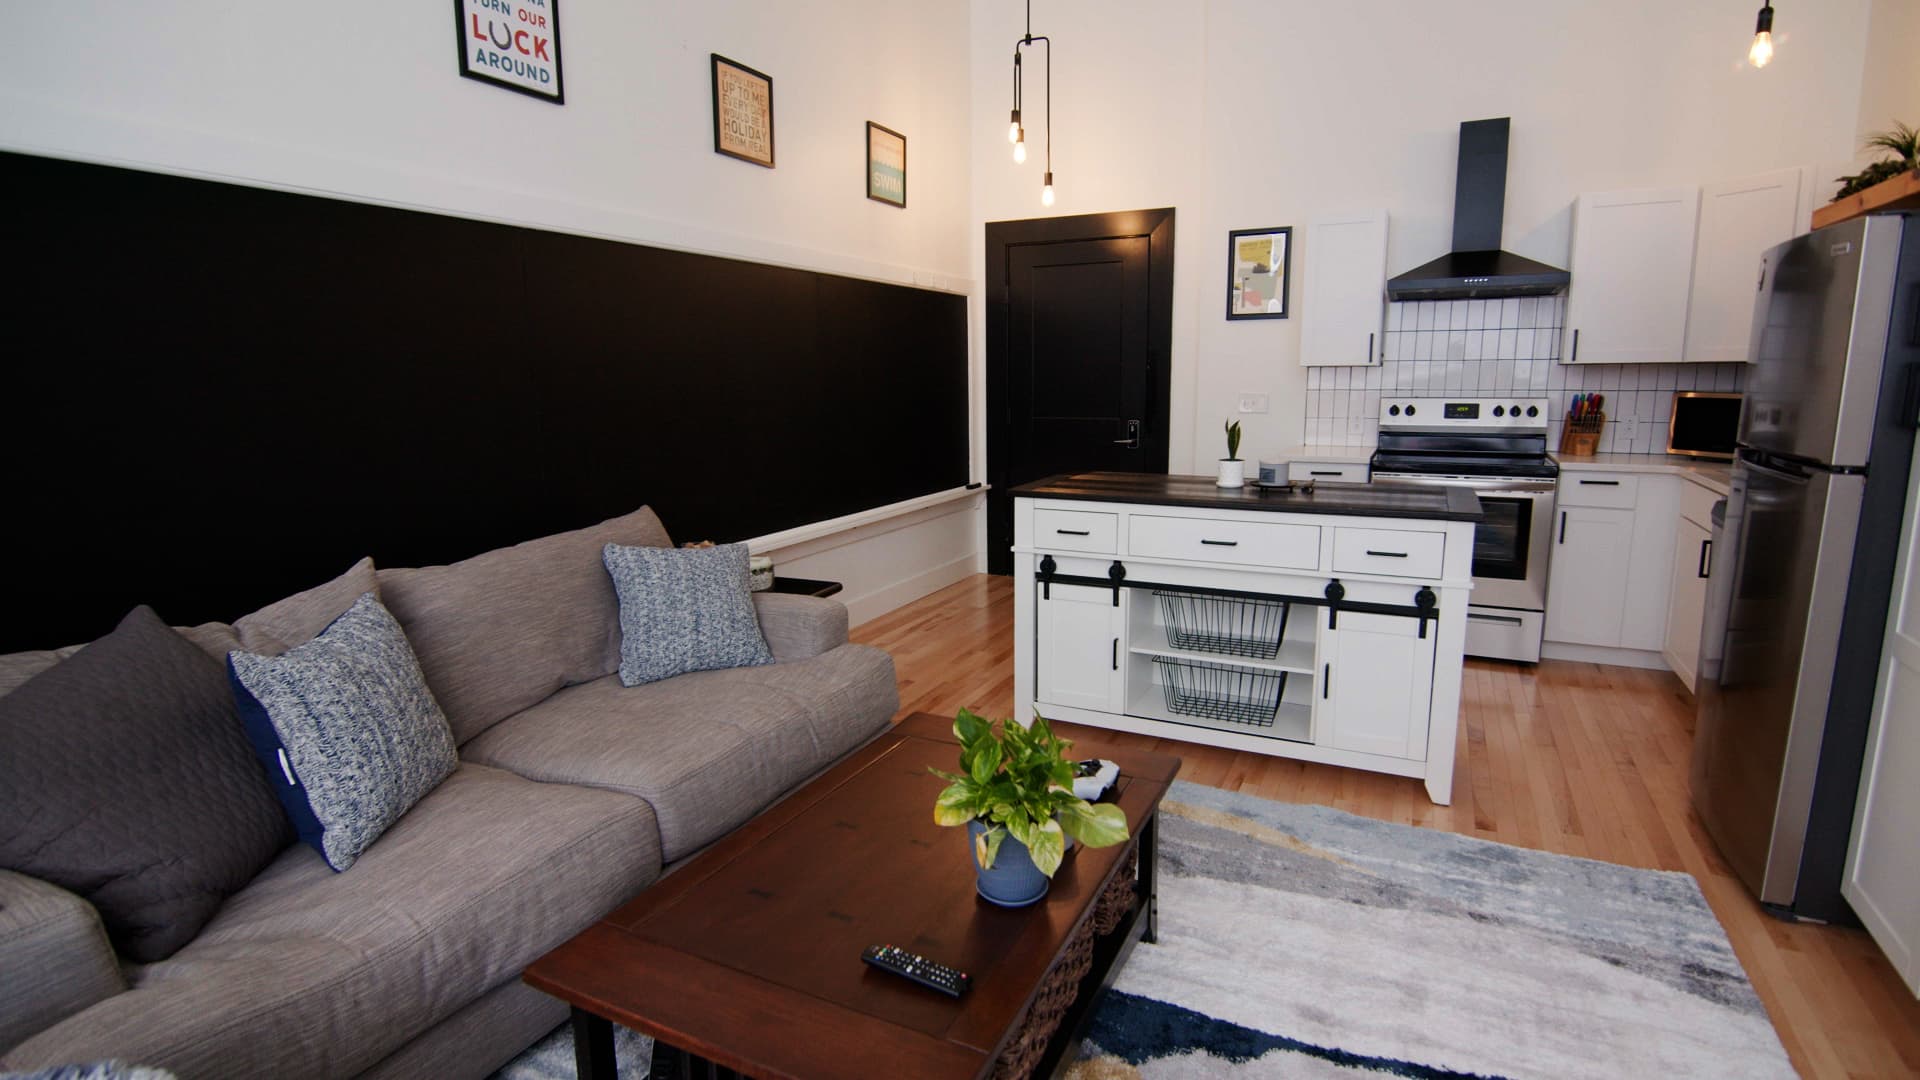 The one-bedroom apartments still have the original chalkboards.